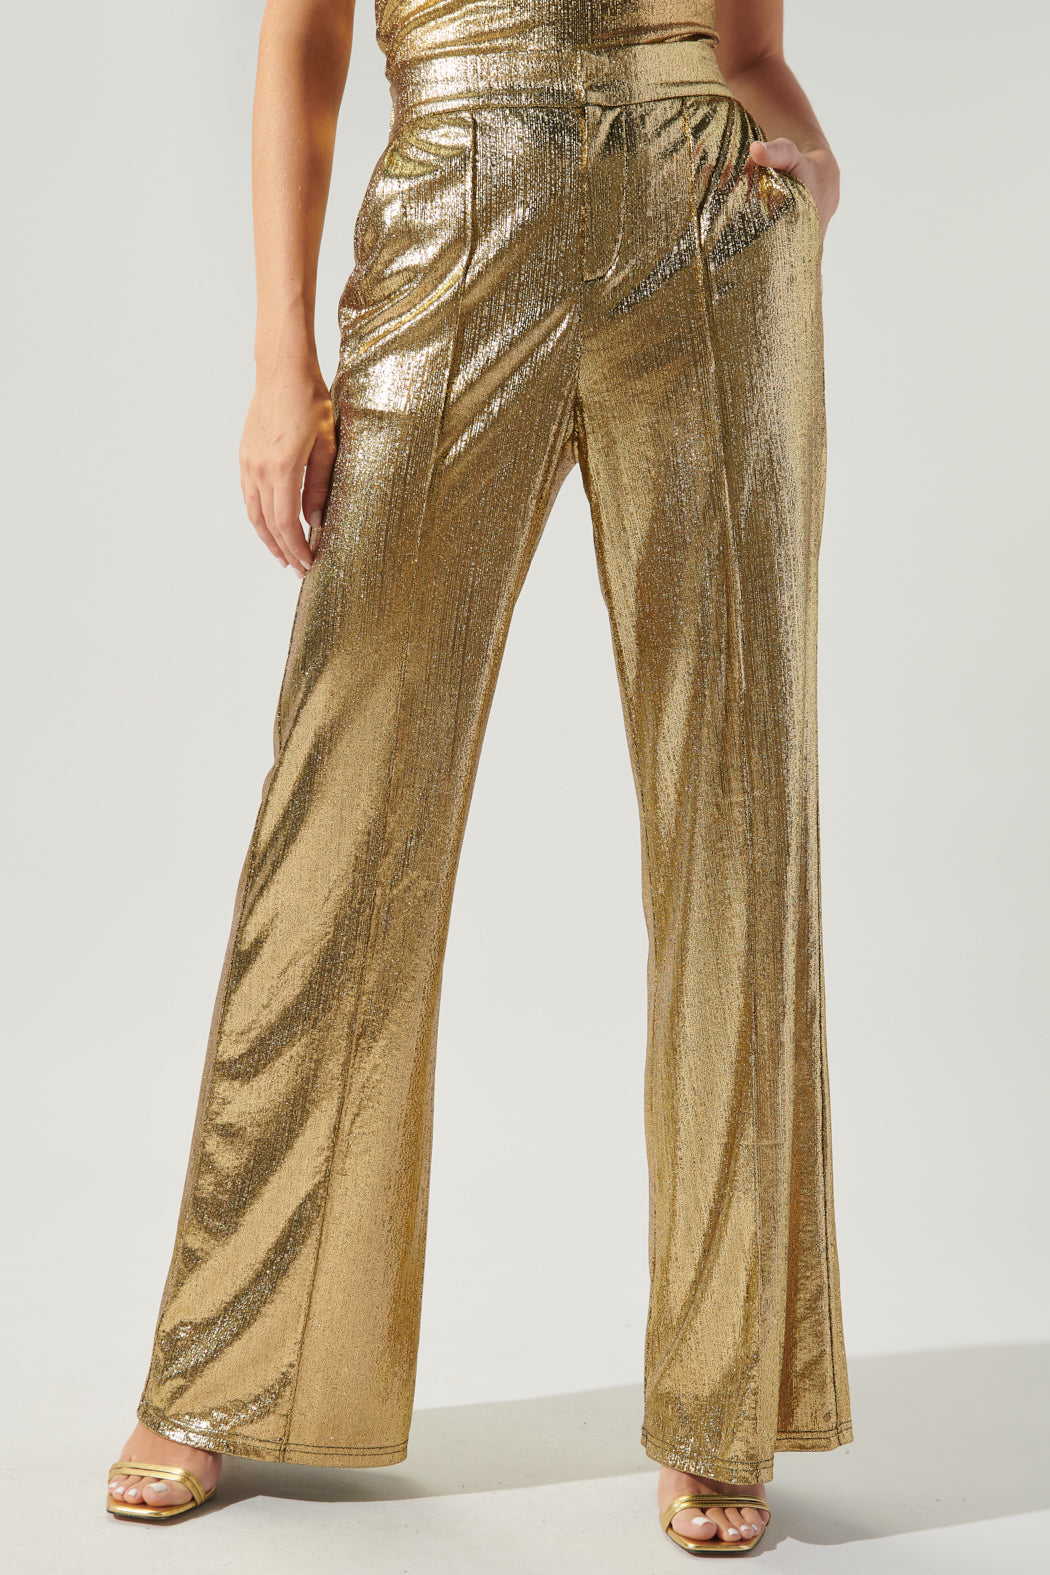 D&G Gold Satin Pants with Lace Panels, Size 30 — Mercer Island Thrift Shop